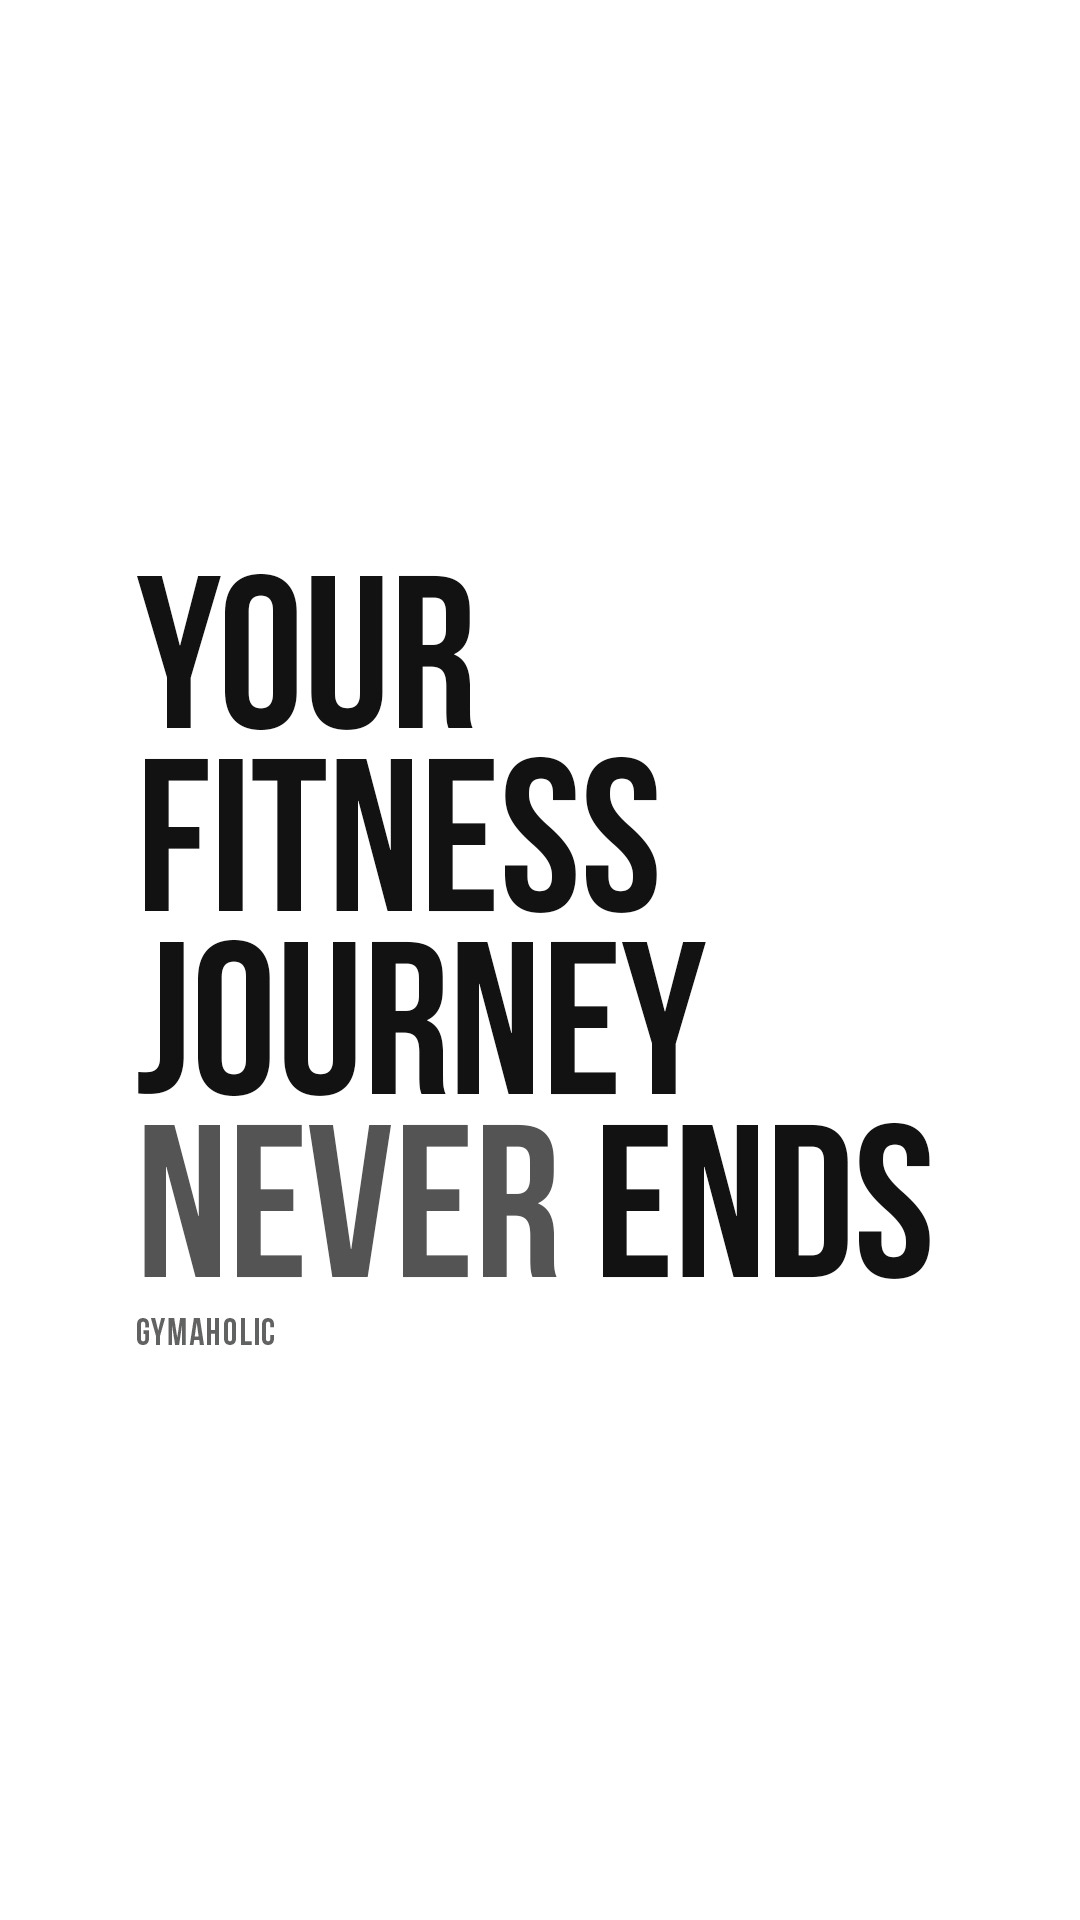 Your fitness journey never ends